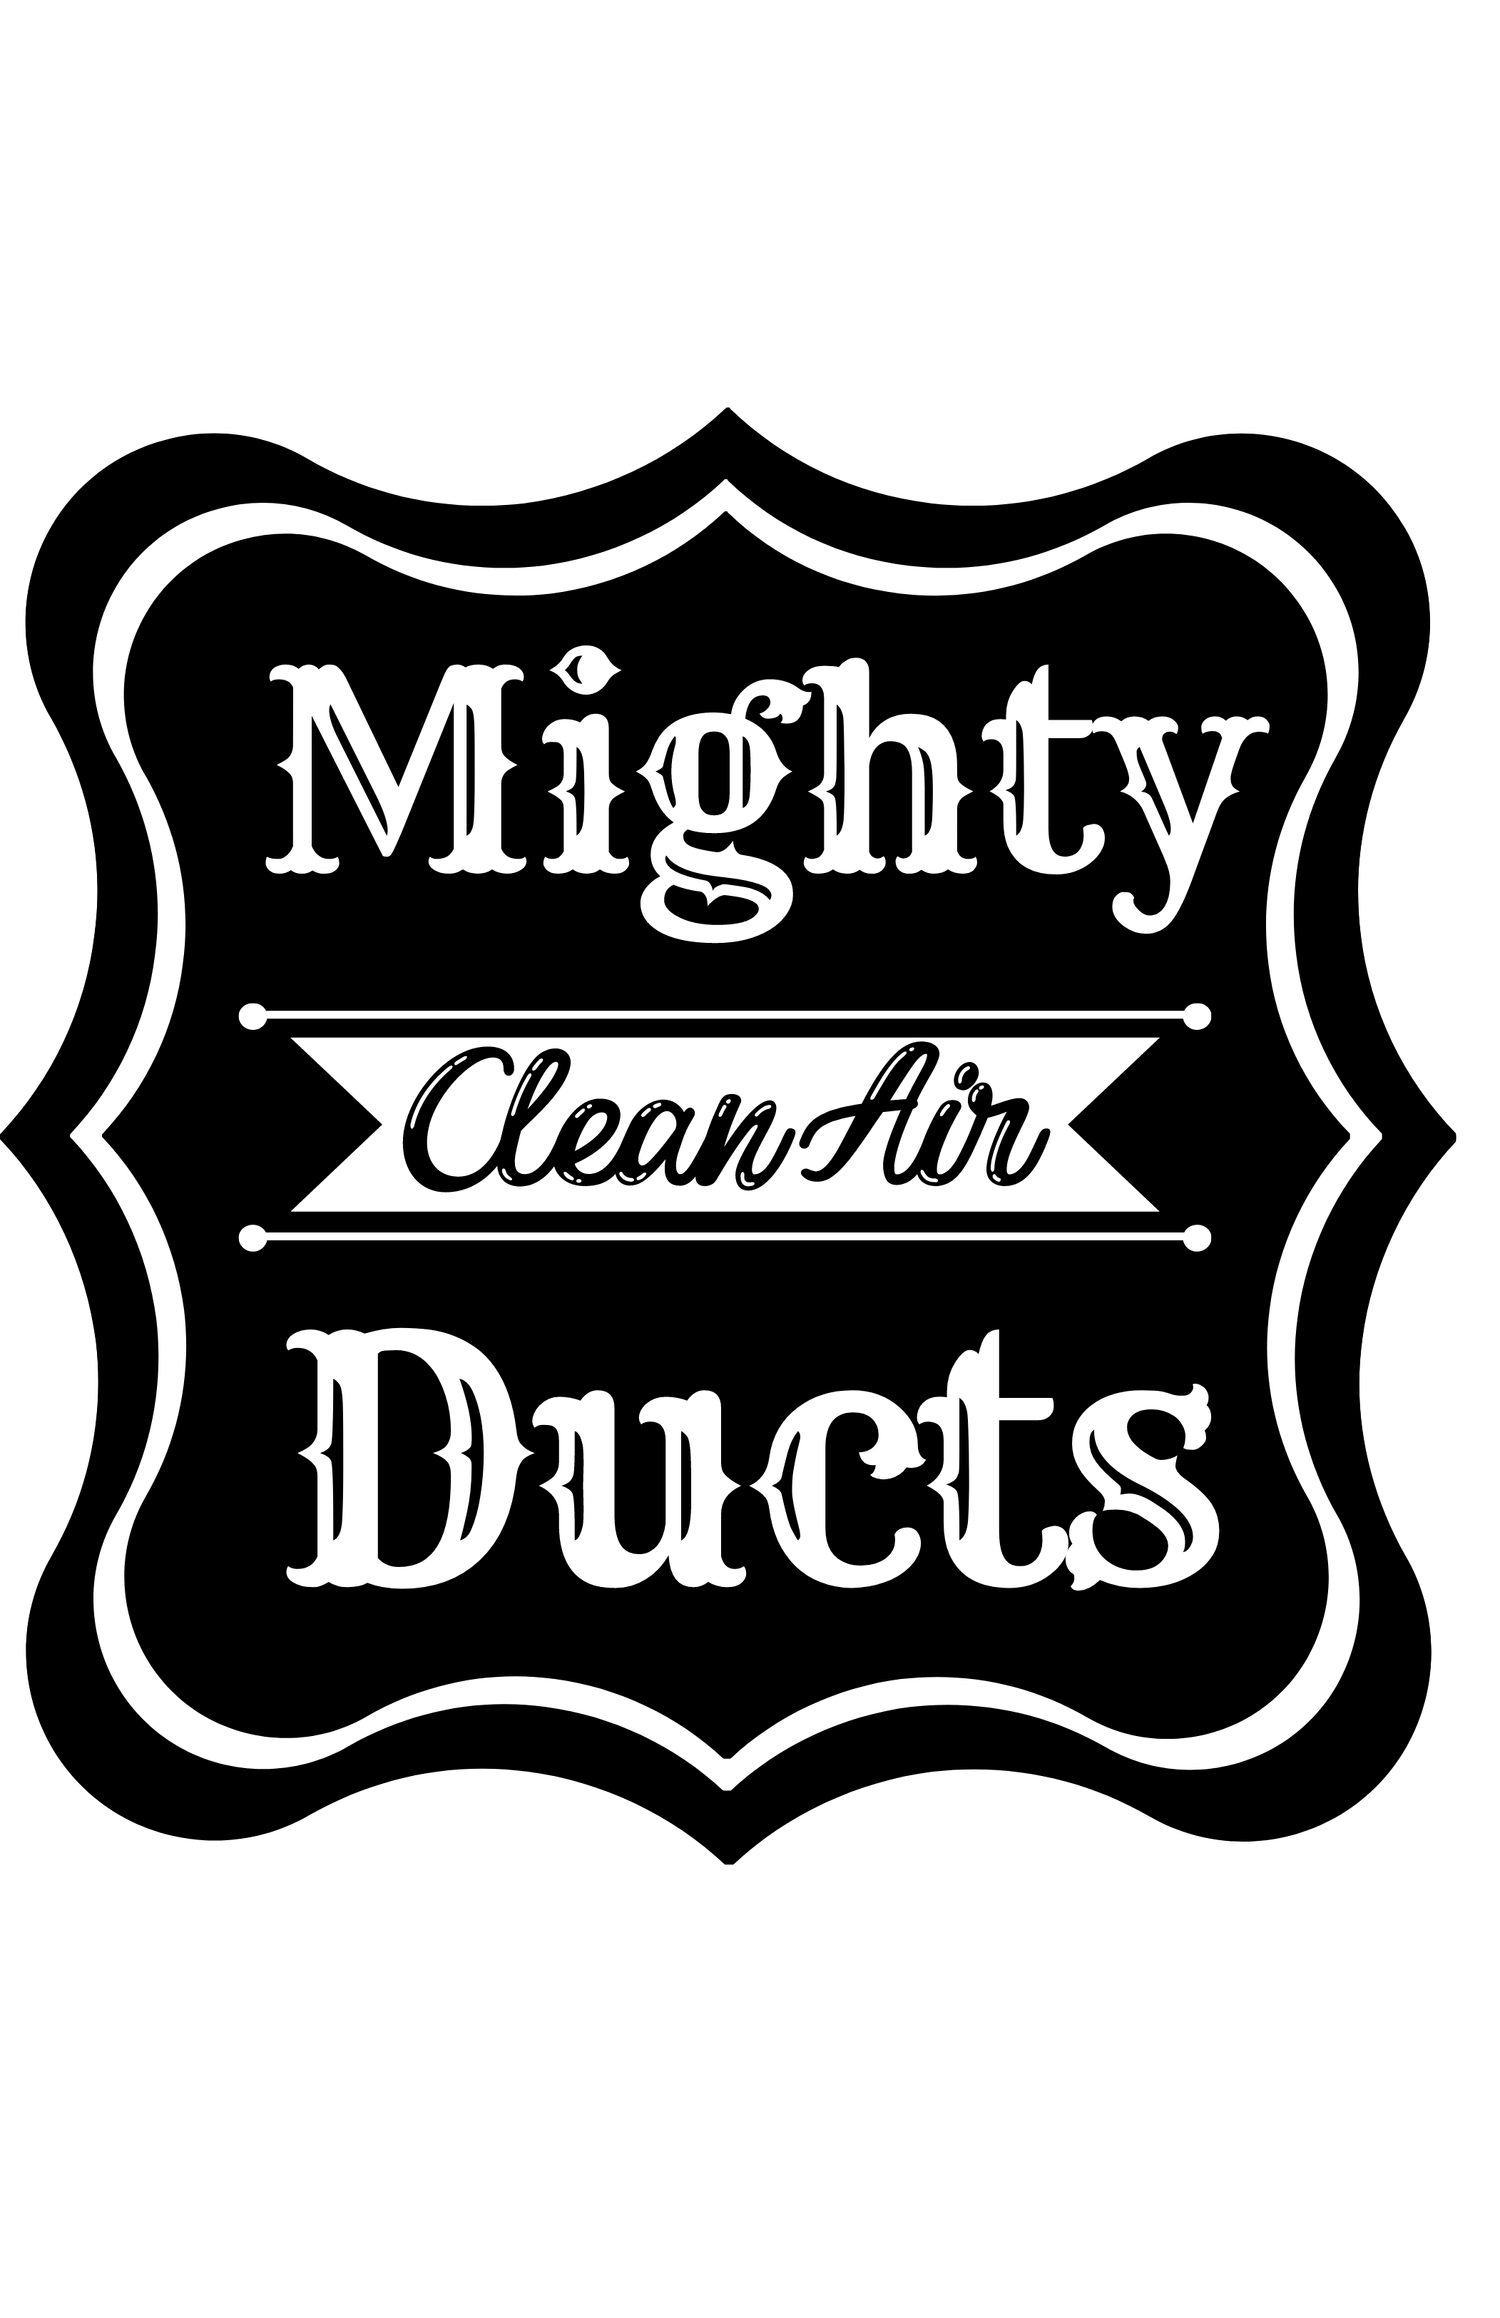 Mighty Clean Air Ducts Spokane